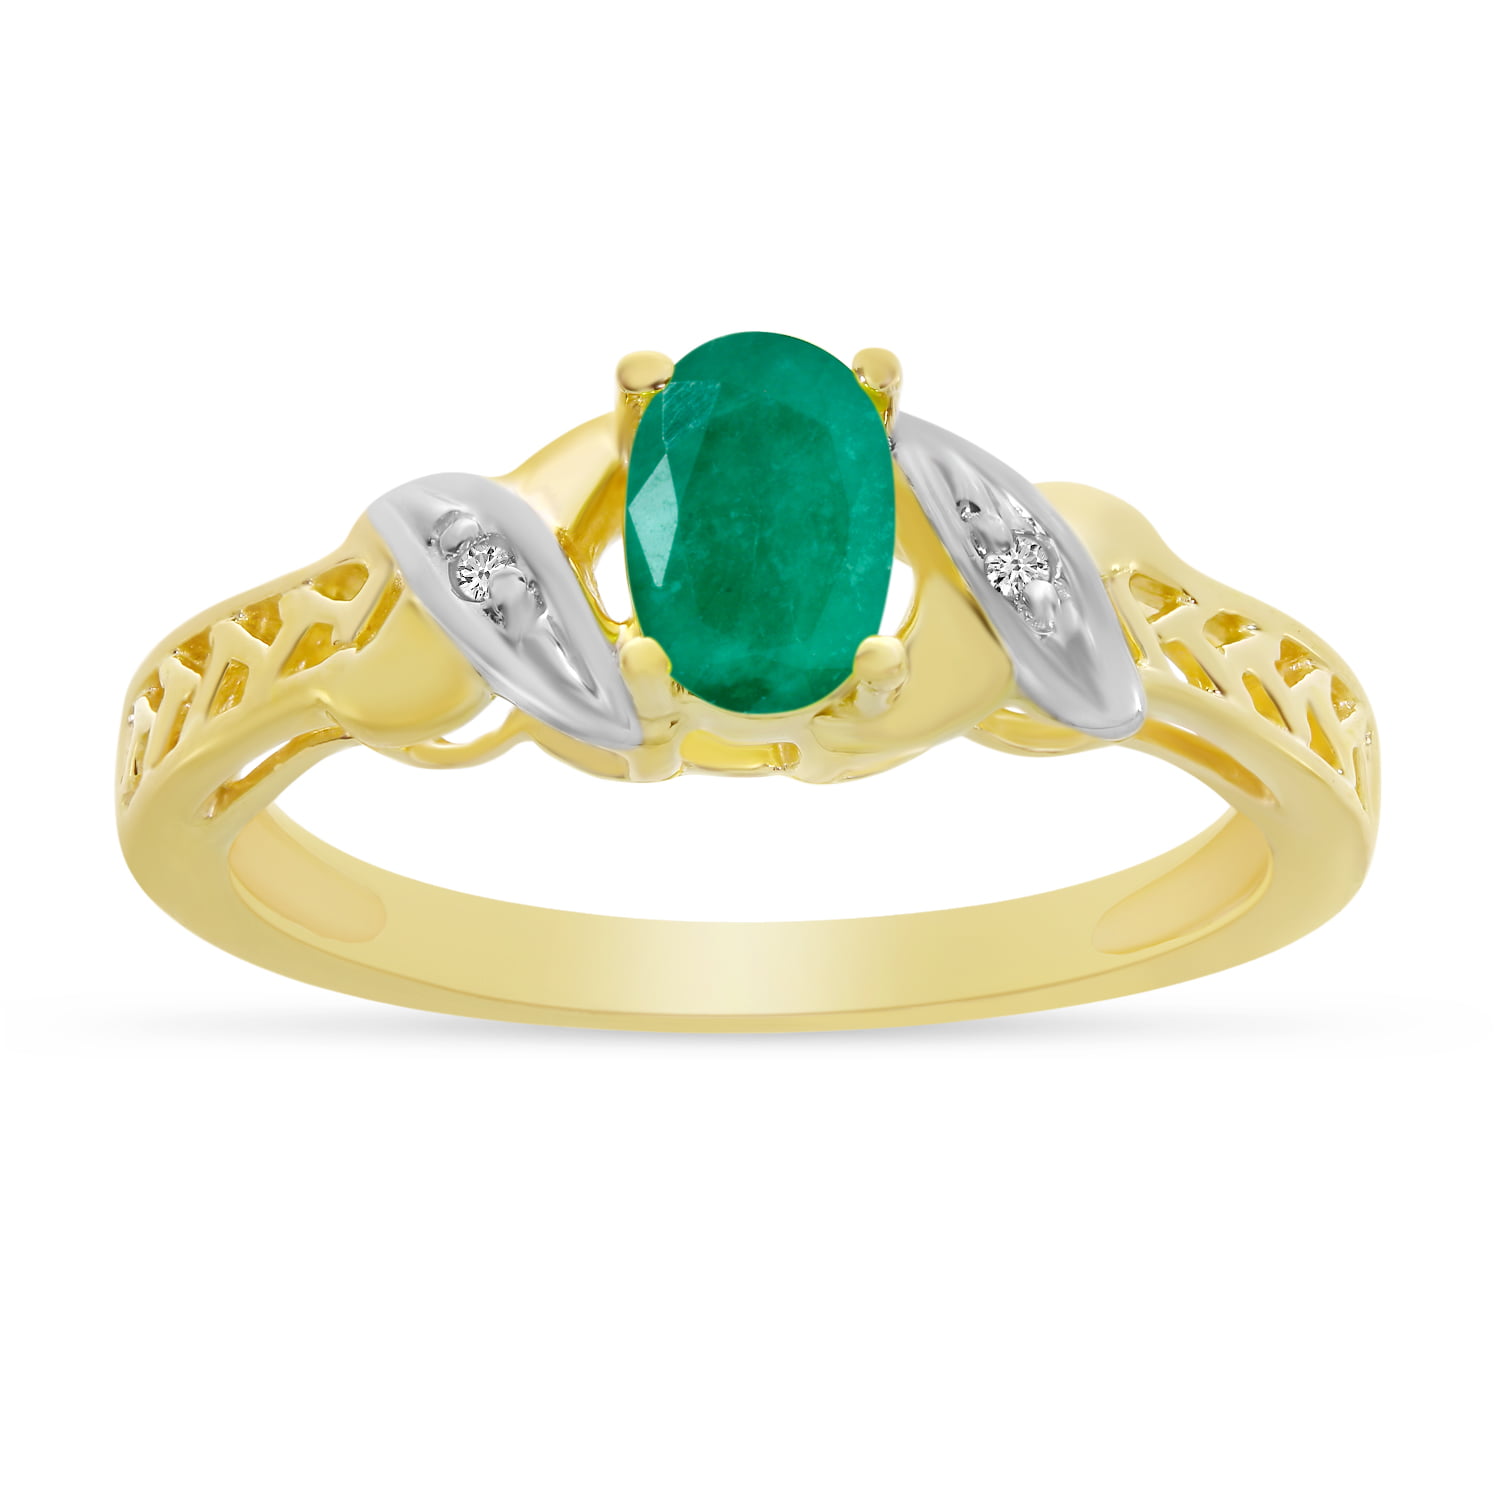 0.31 Carat 6 x 4 MM ctw 10k Gold Oval Green Emerald and Diamond Bypass Swirl Cocktail Anniversary Fashion Ring